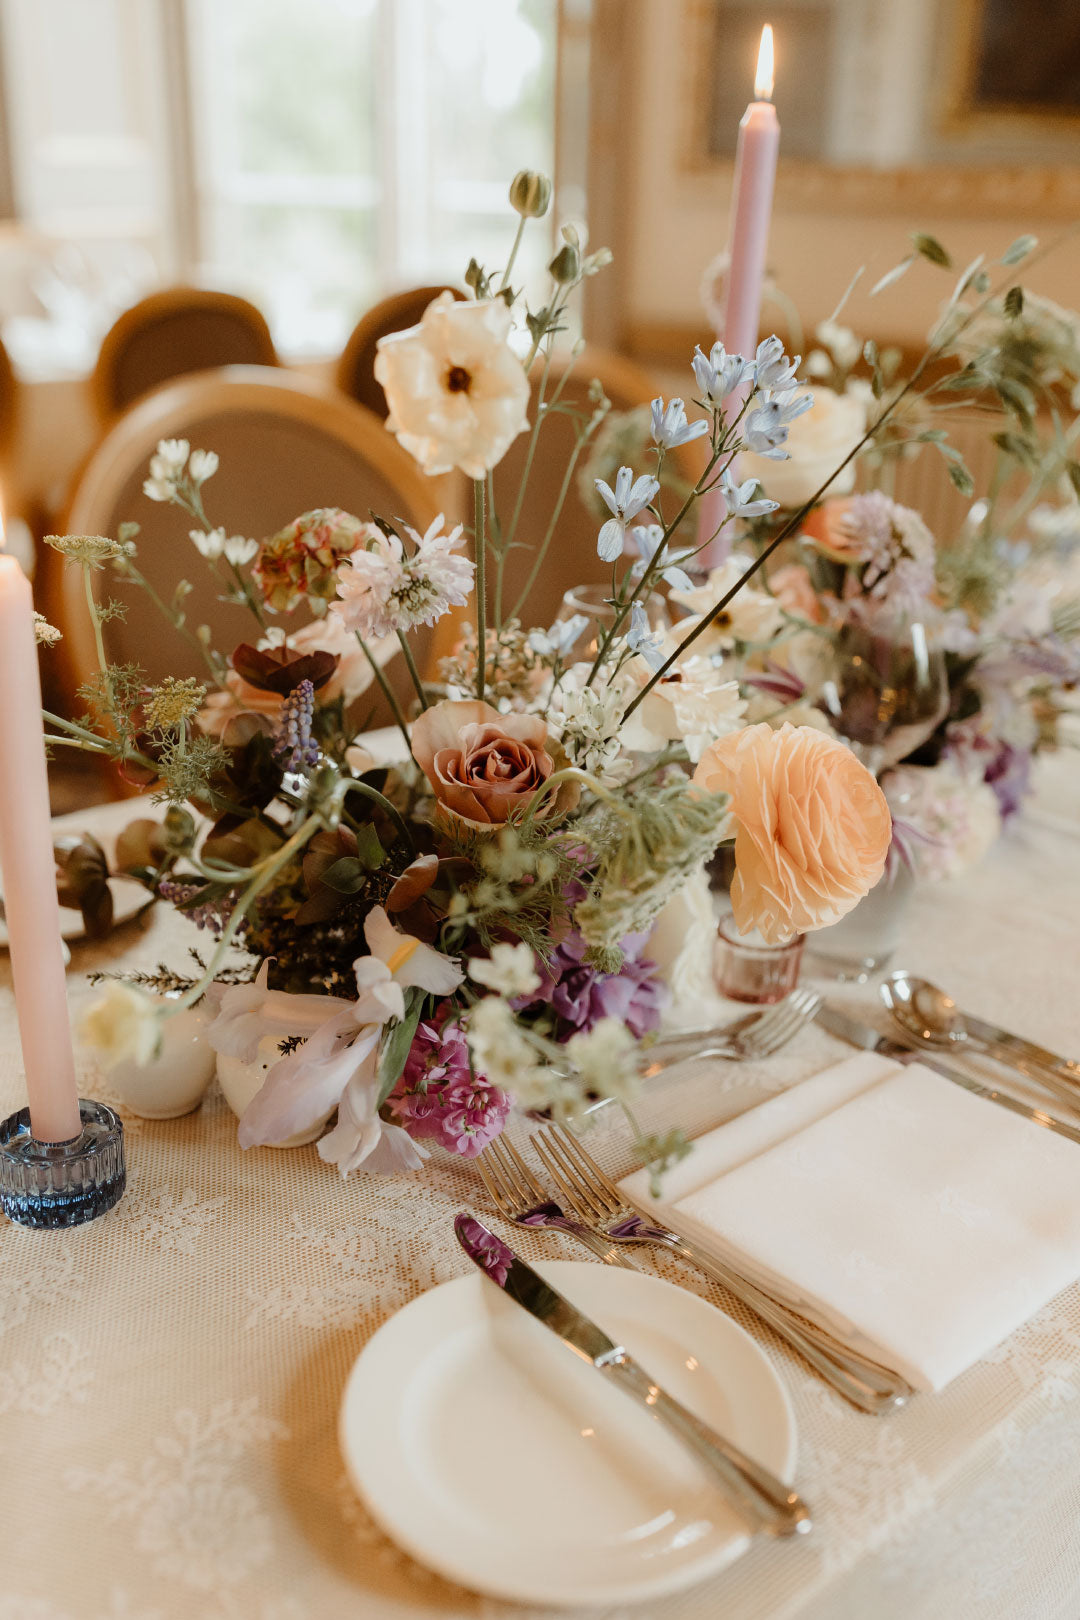 Wedding floral arrangement with tabletop setting